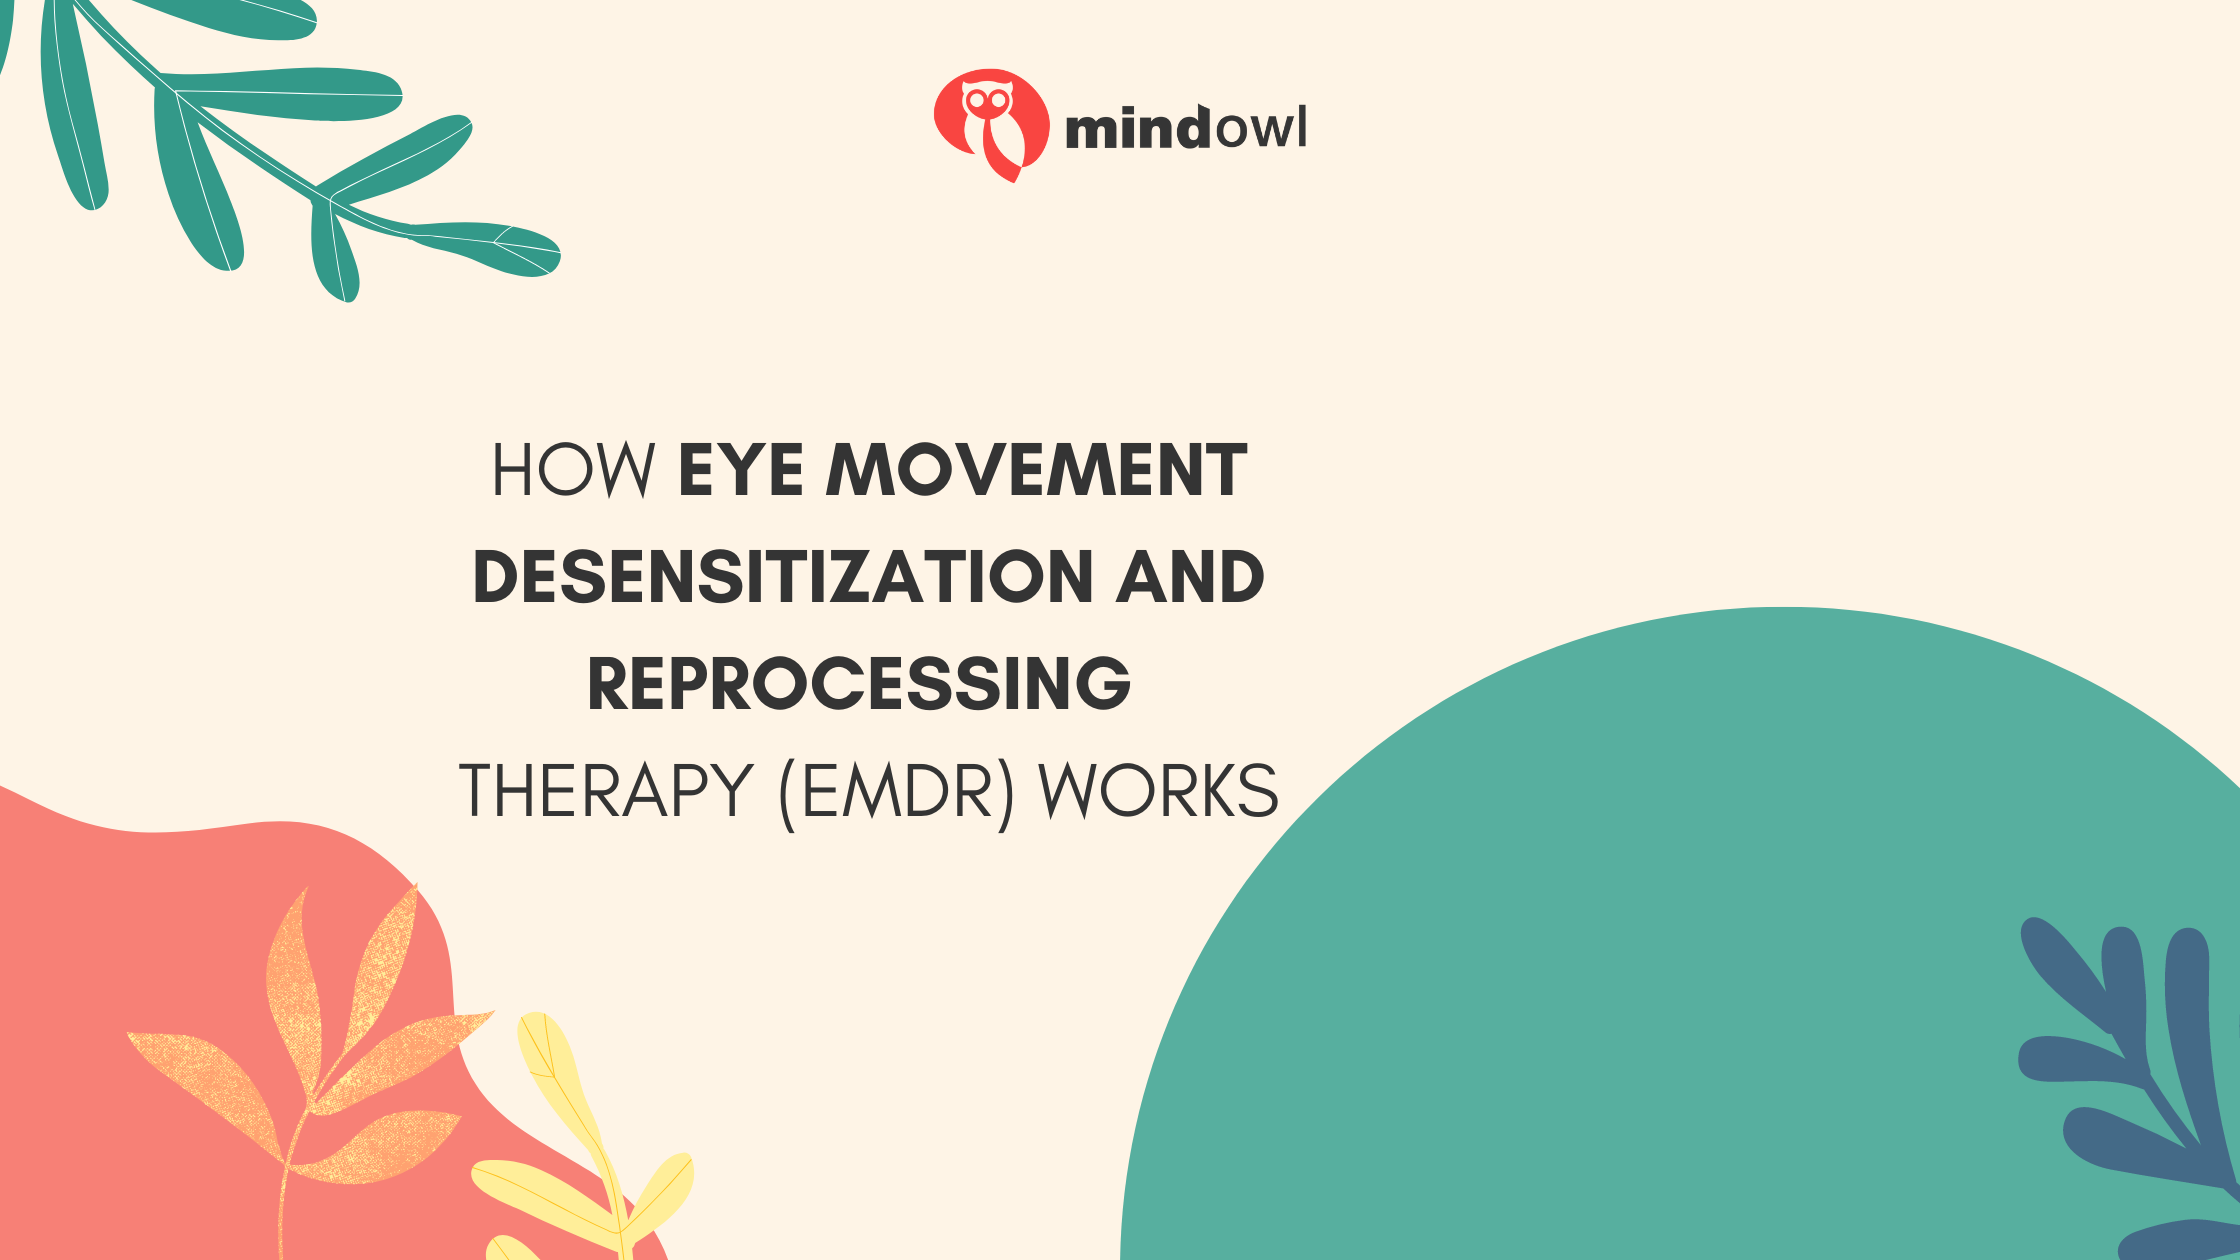 How Eye Movement Desensitization and Reprocessing Therapy (EMDR) Works